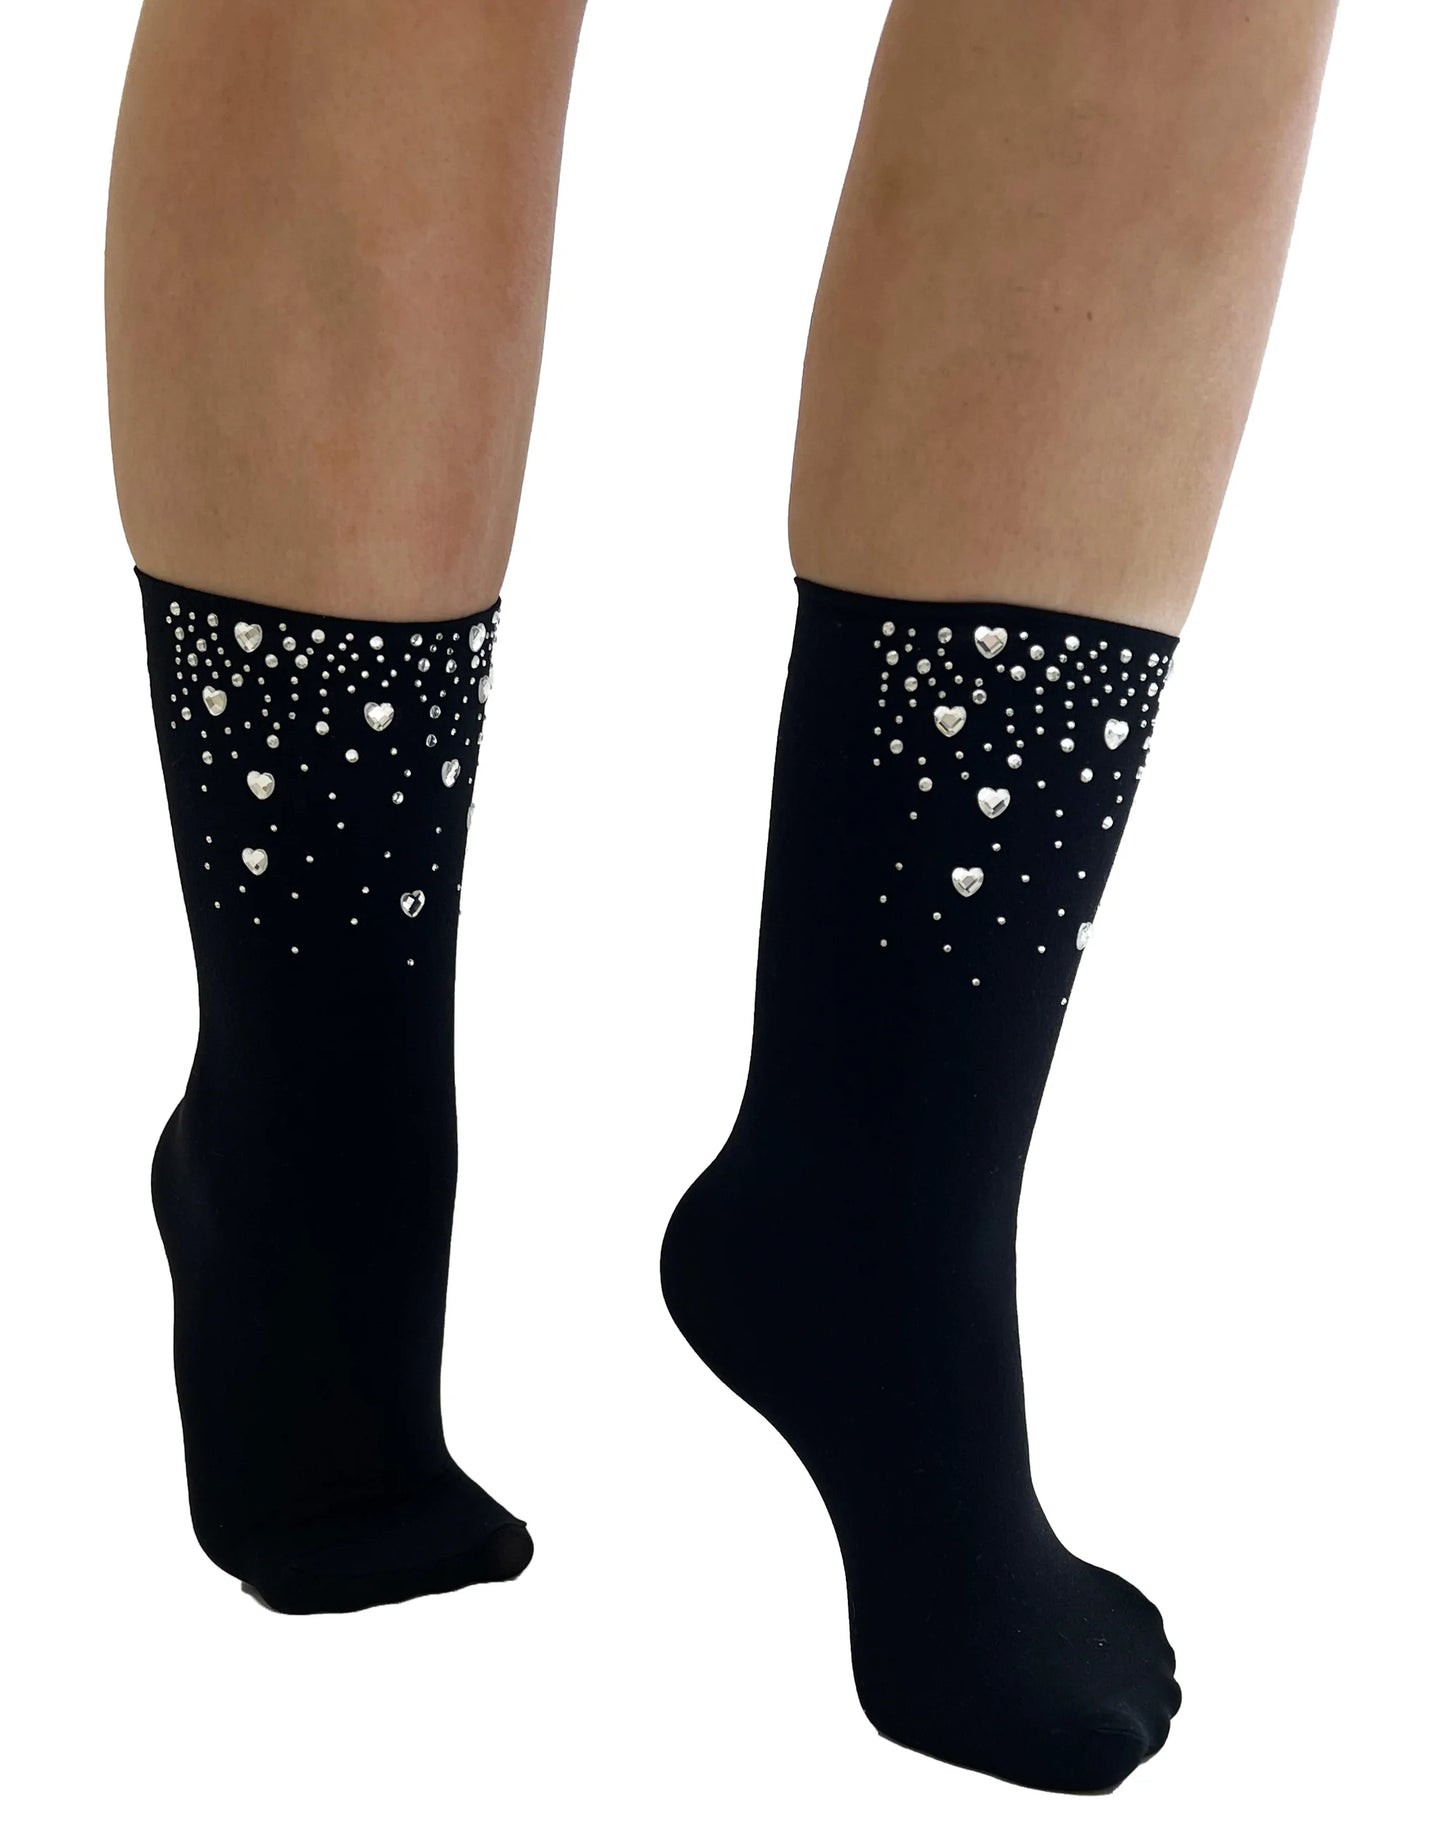 Pamela Mann Embellished Diamantí© Heart Socks - Black opaque fashion ankle socks with sparkly round and heart shaped rhinestone dotted on the front.